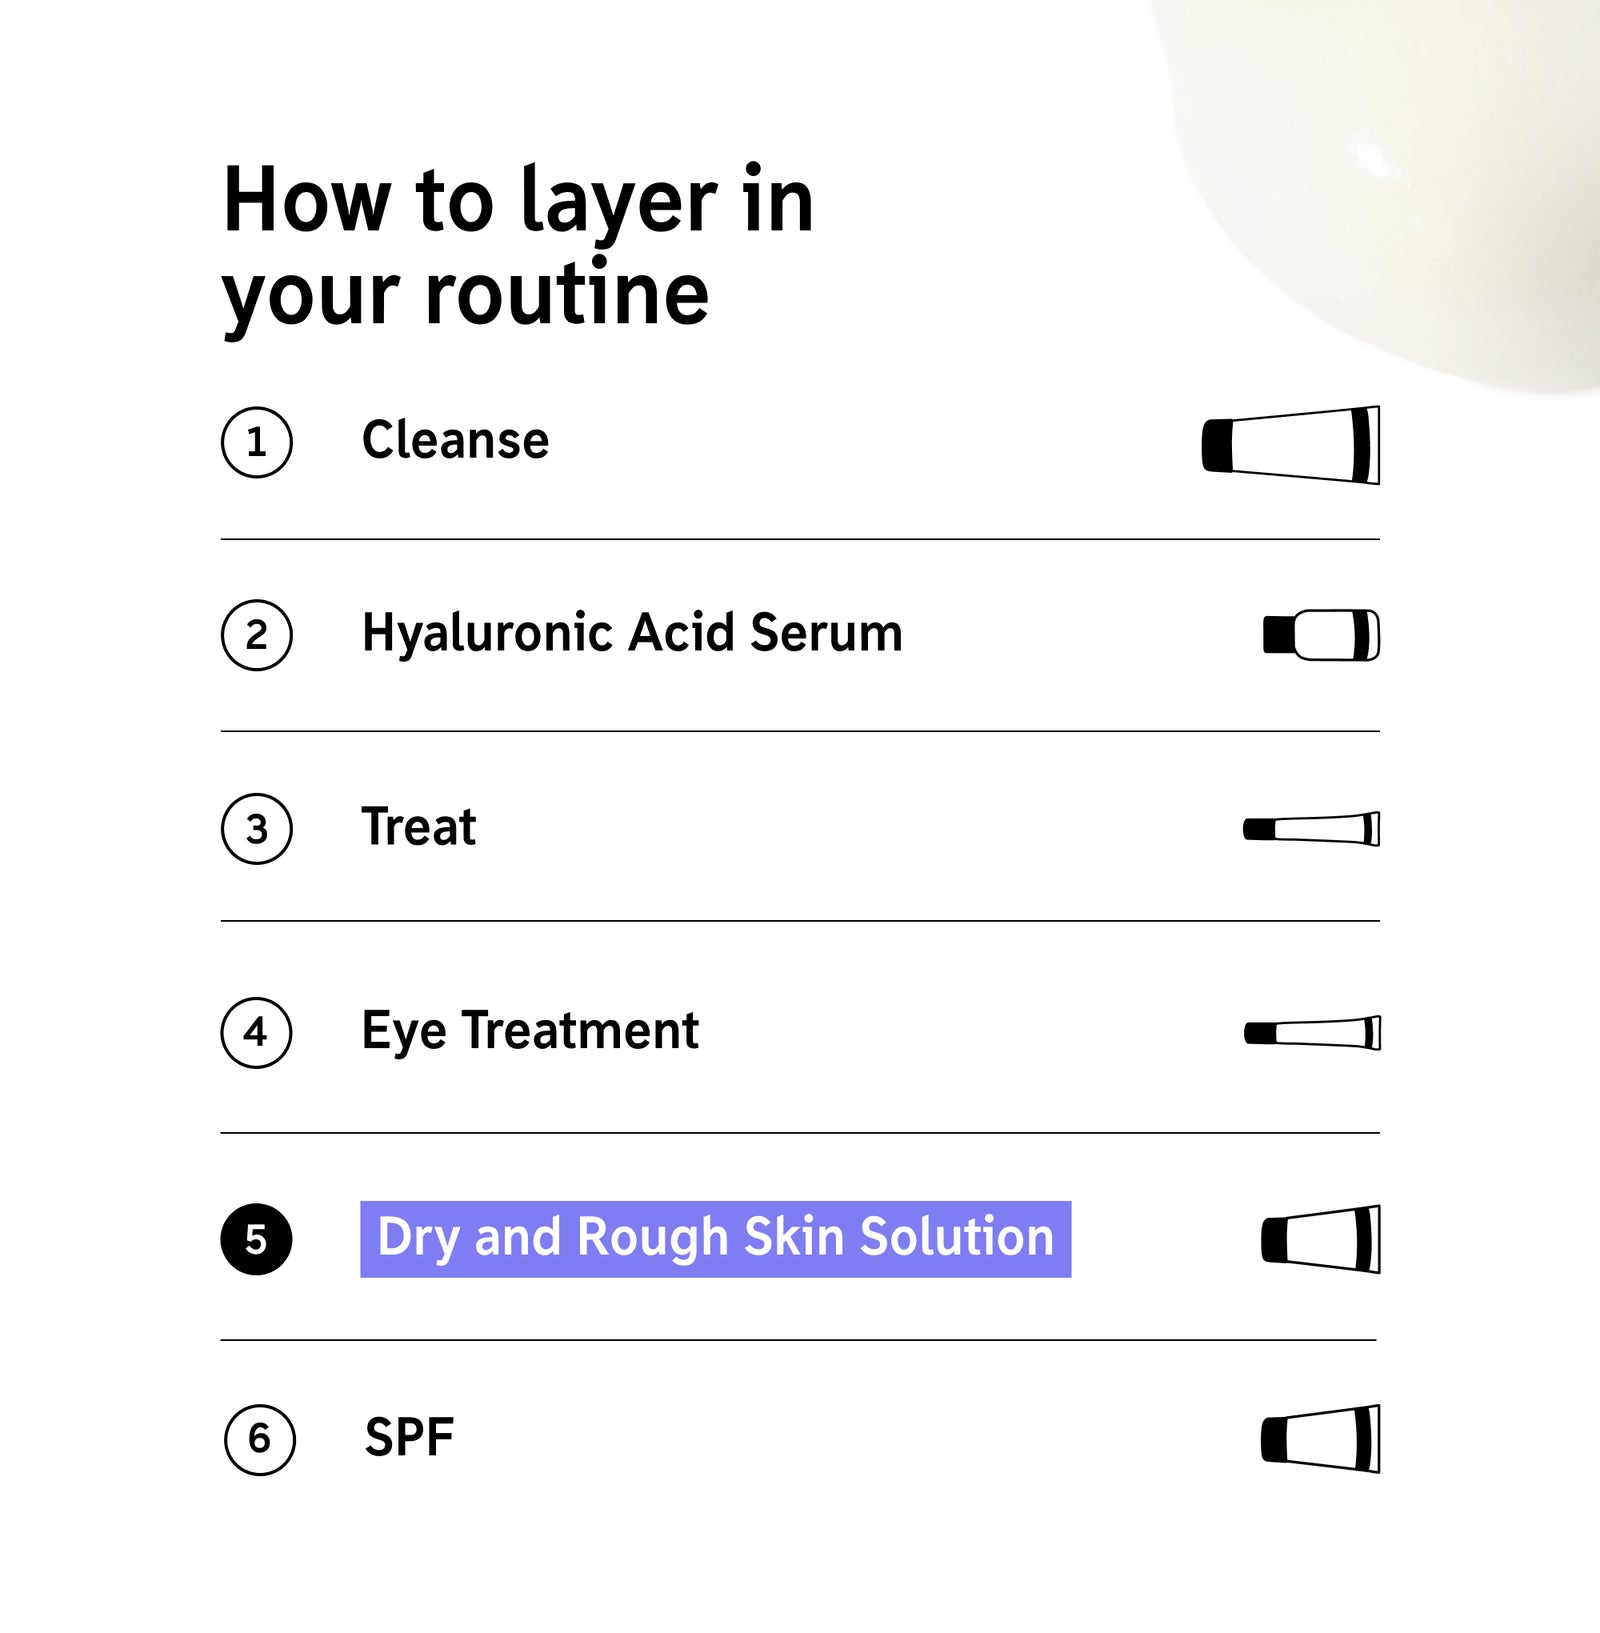 How to layer Dry & Rough Skin Solution in your routine